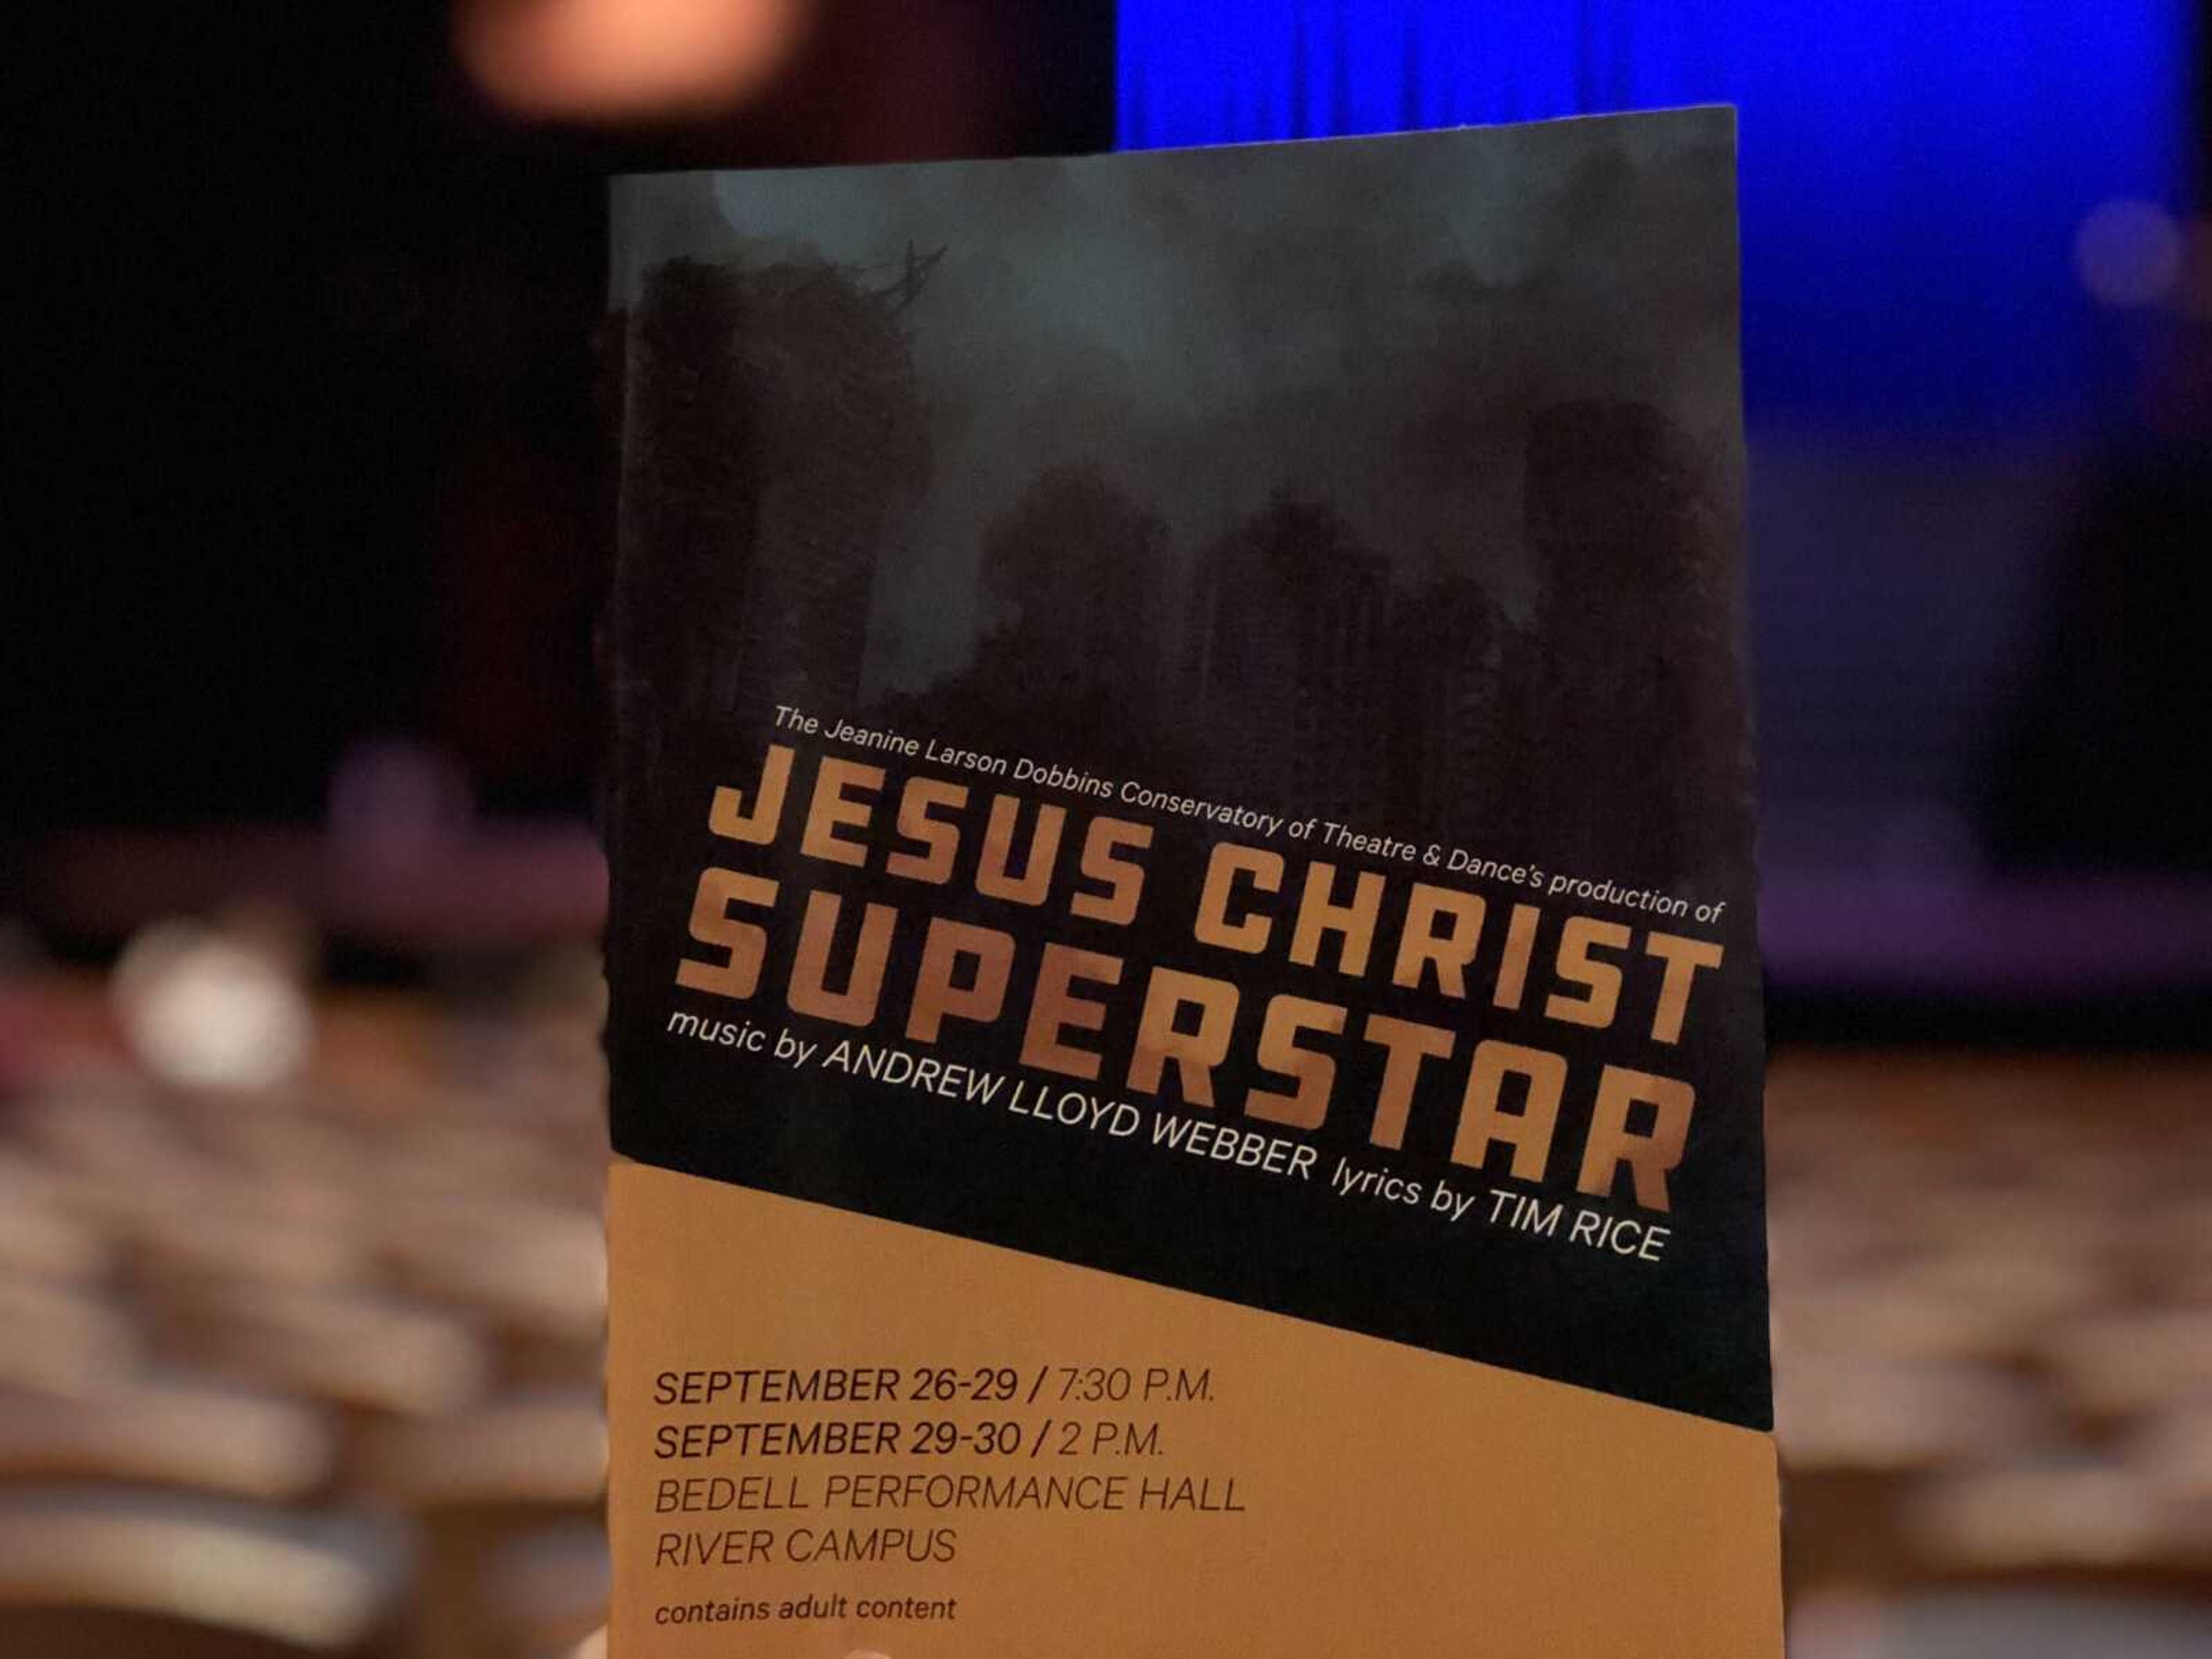 “Jesus Christ Superstar” was held from Sept. 26 to 30 at the Bedell Performance Hall.